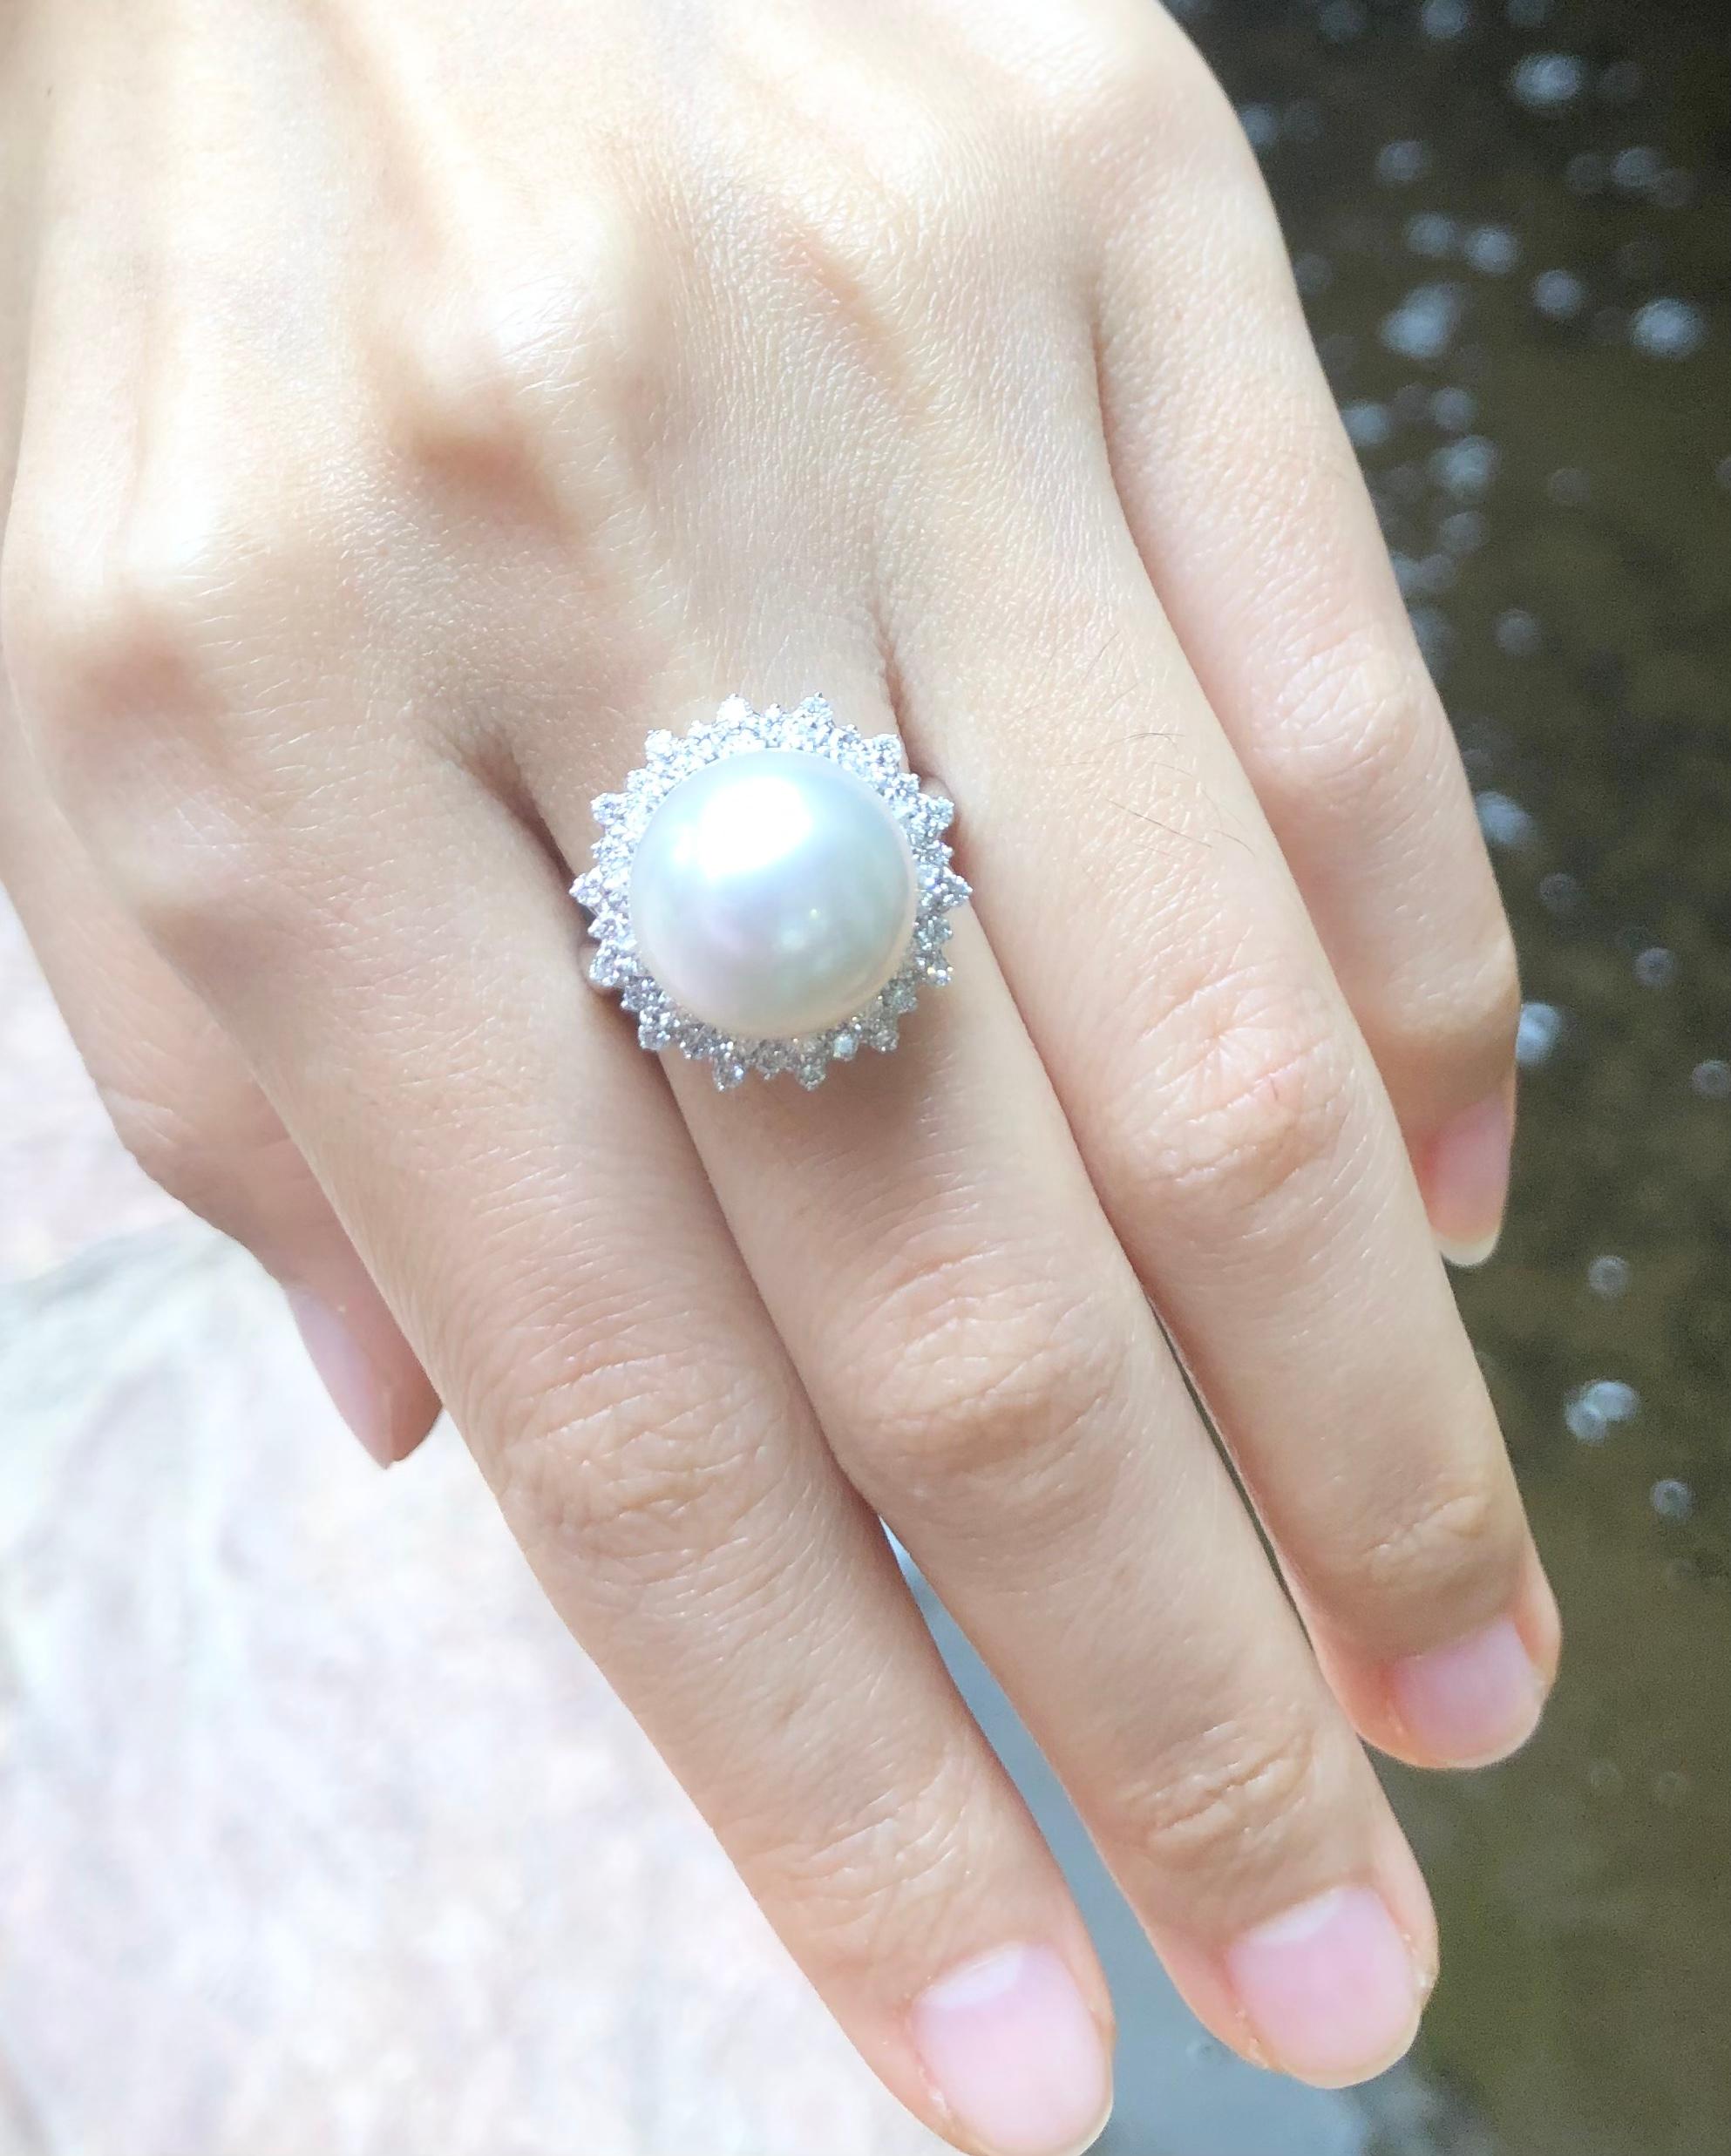 South Sea Pearl with Diamond 0.38 carat Ring set in 18 Karat White Gold Settings

Width:  1.8 cm 
Length: 1.8 cm
Ring Size: 51
Total Weight: 8.92 grams

South Sea Pearl: 12.6 mm

